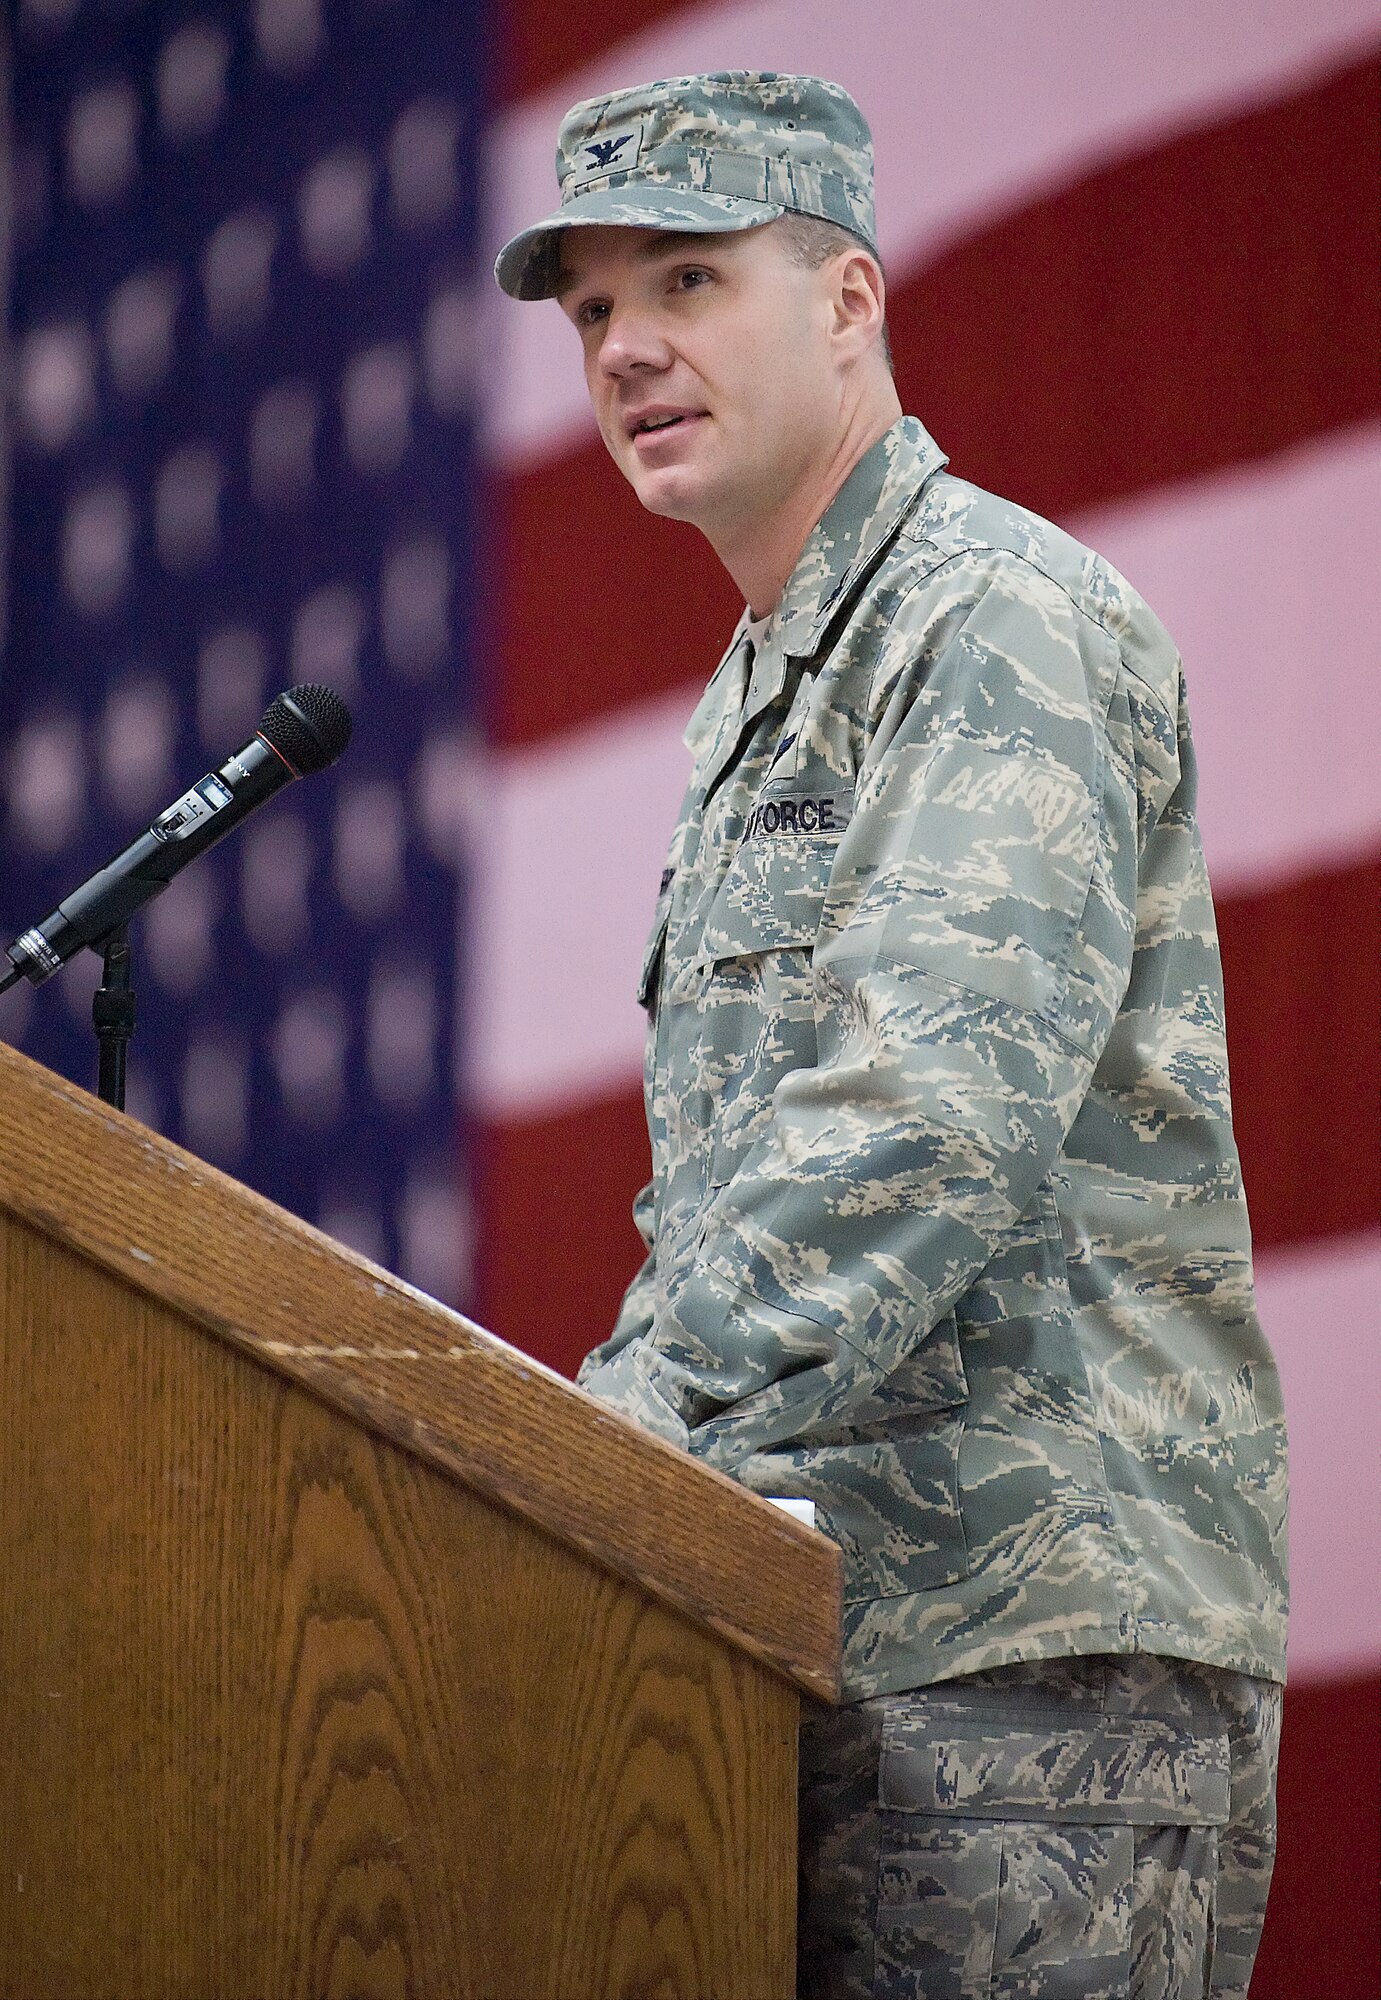 Col. Manson O. Morris, 436th Airlift Wing commander, addresses the crowd after assuming command of the Eagle Wing during the change-of-command ceremony Jan. 9. Colonel Morris assumed command from Col. Steven B. Harirson, who will become the commander of the 89th Airlift Wing, Andrews Air Force Base, Md. (U.S. Air Force photo/Roland Balik)